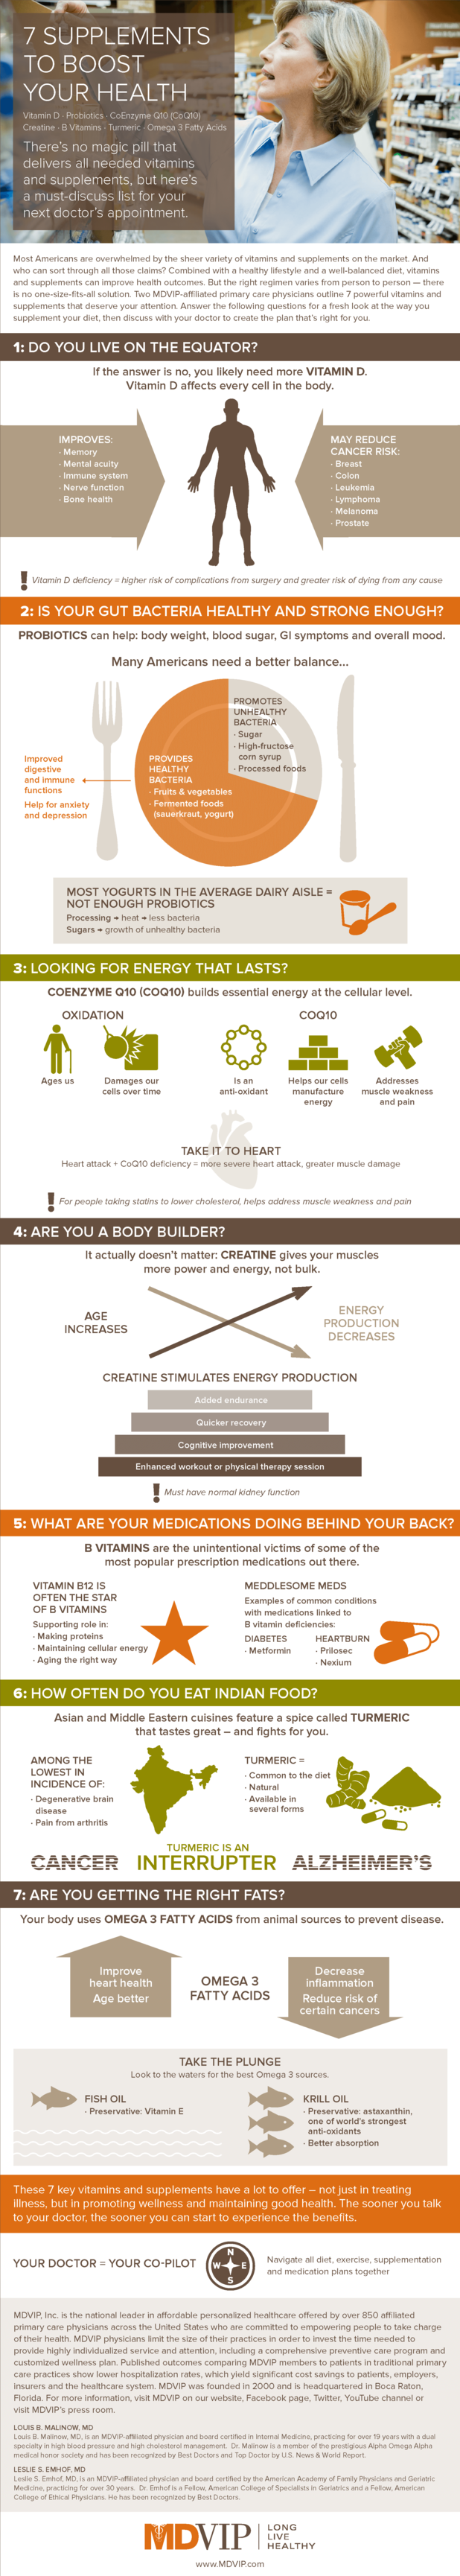 Health Boosting Vitamins and Supplements Infographic